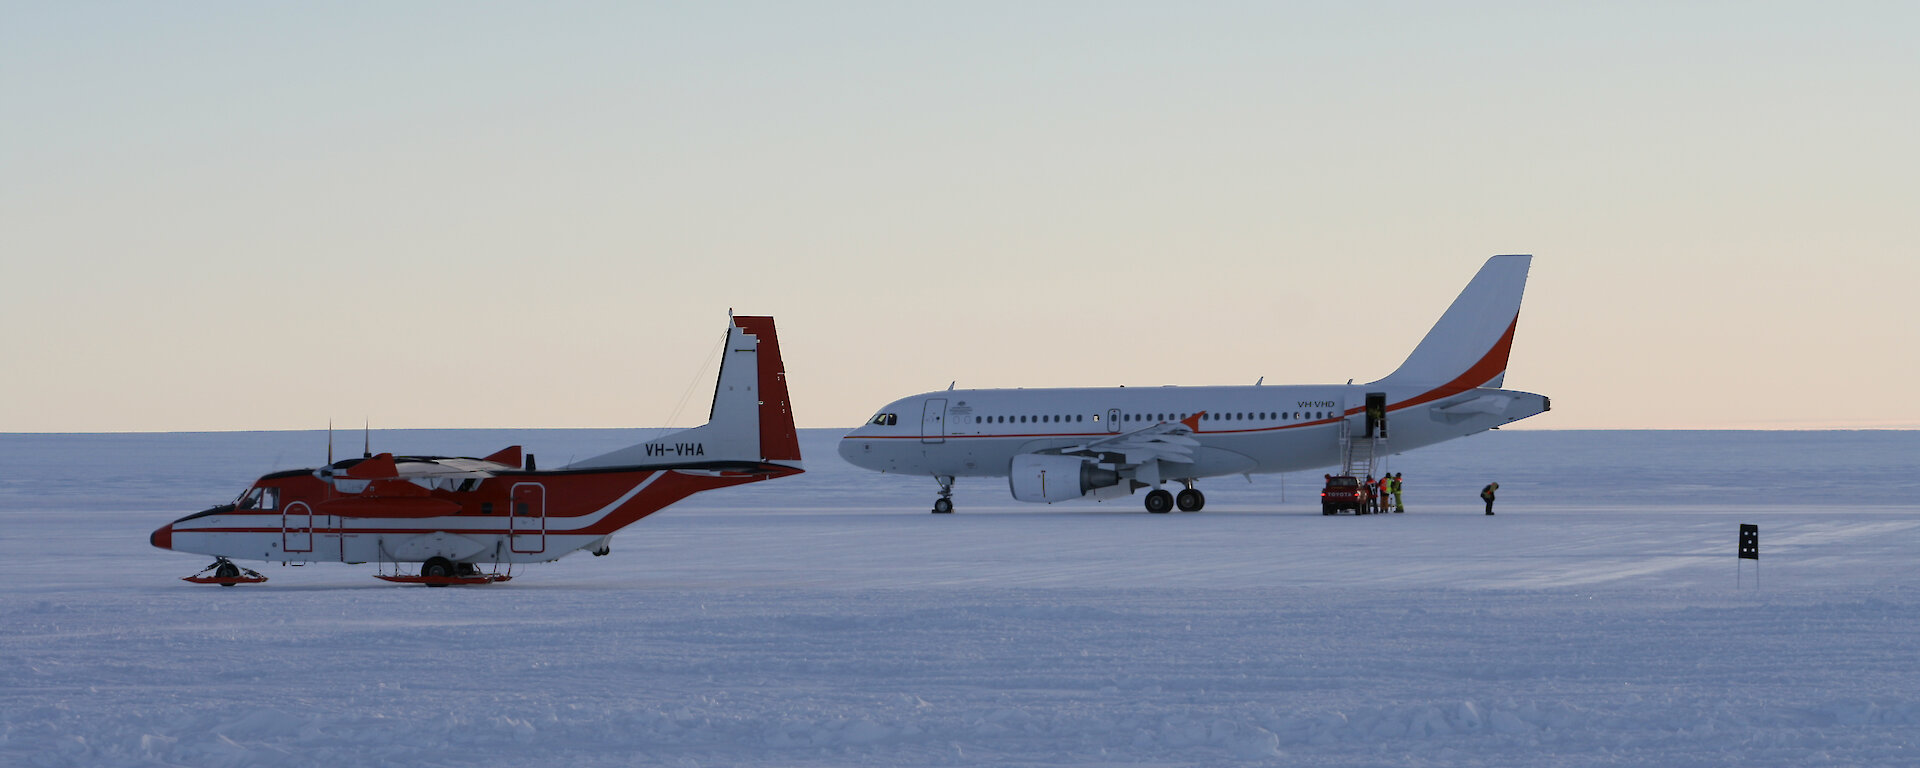 The Airbus A319 and C212 at Wilkins Runway in Antarctica